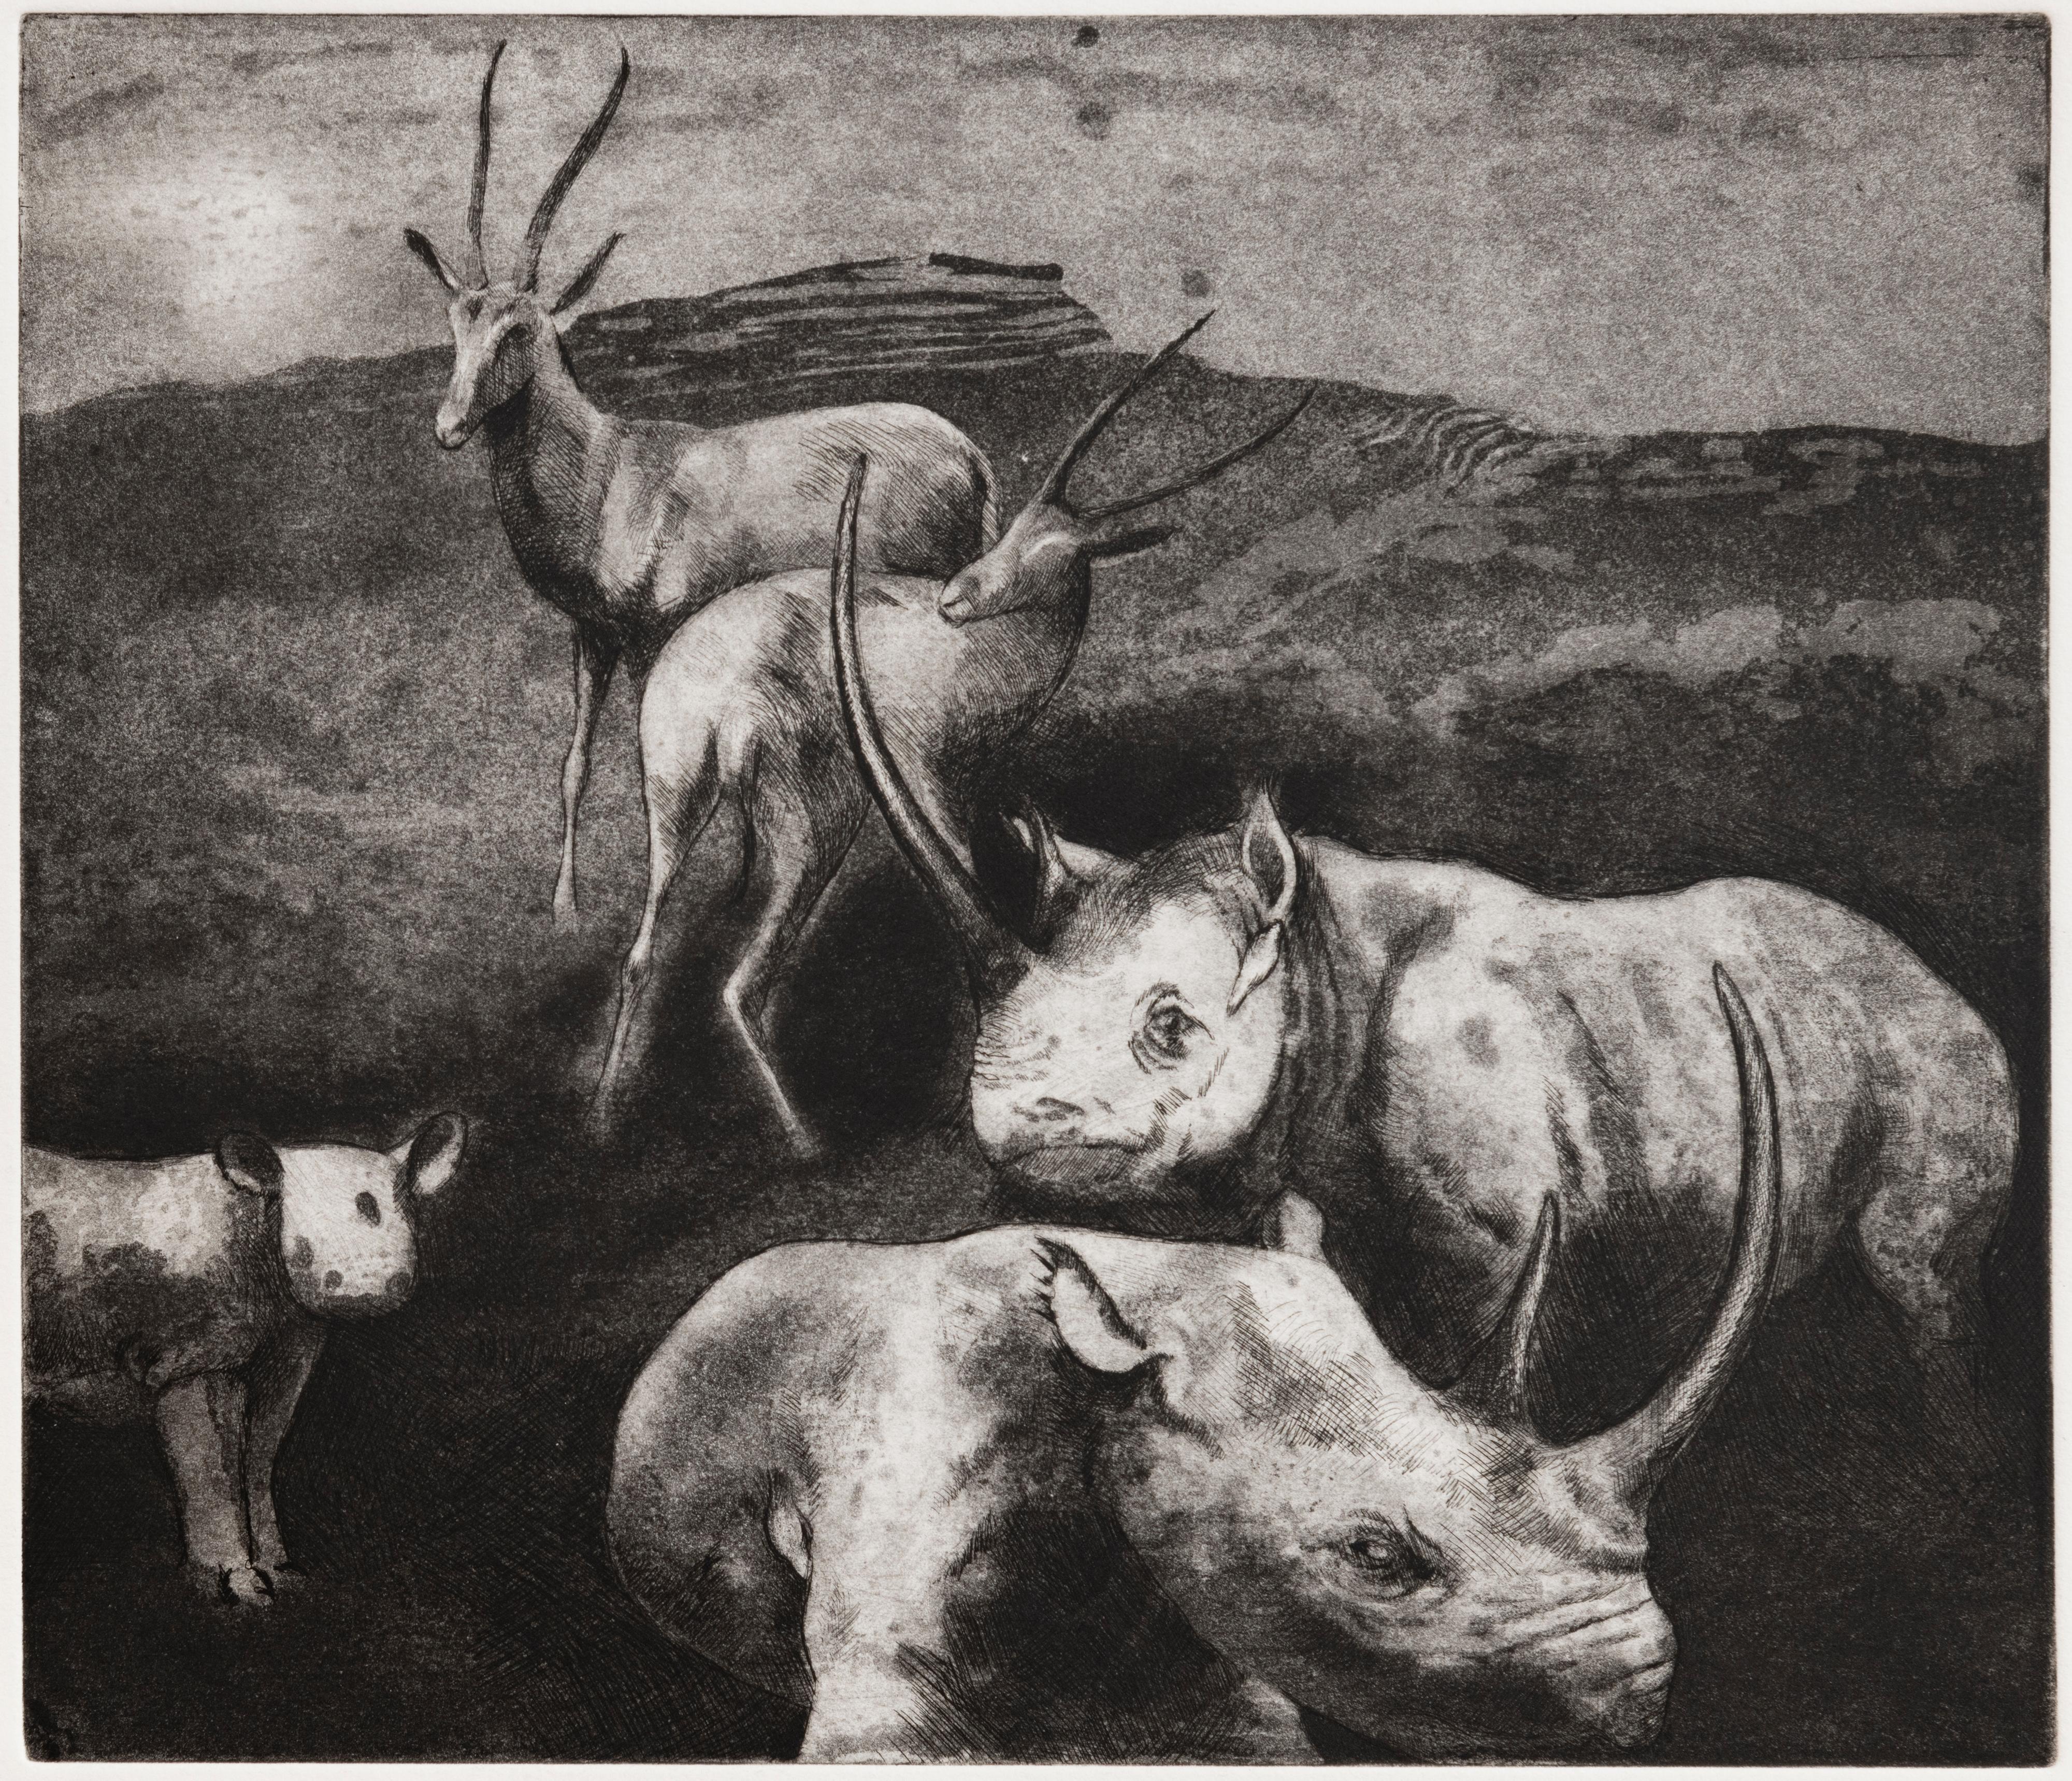 Rhino and Antelope-A : etching with wild animals